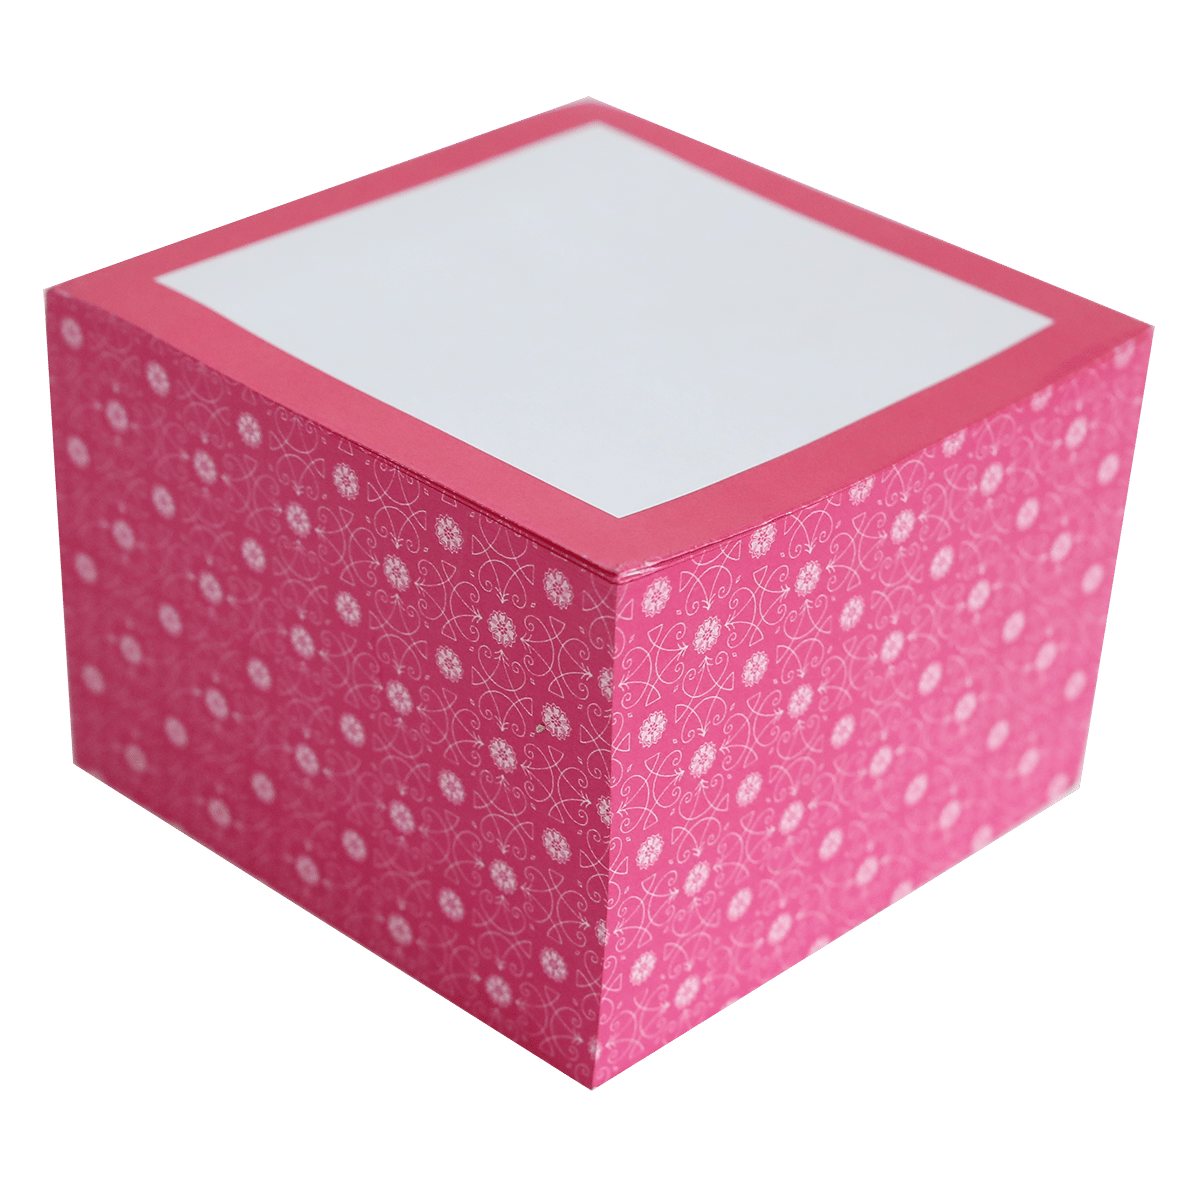 a pink box with white dots on it.